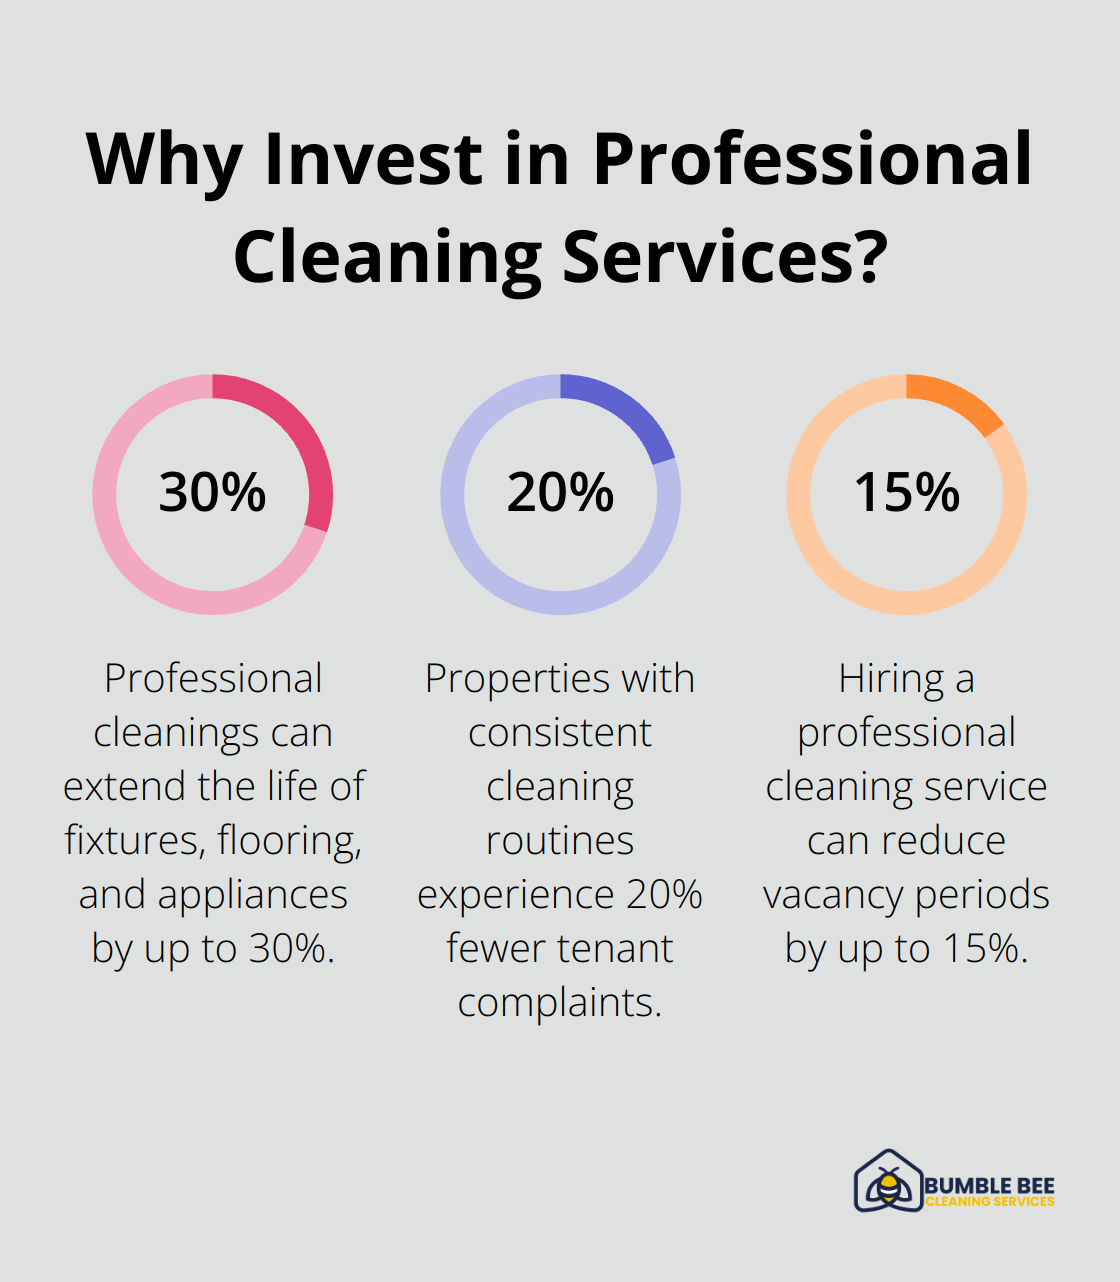 Fact - Why Invest in Professional Cleaning Services?